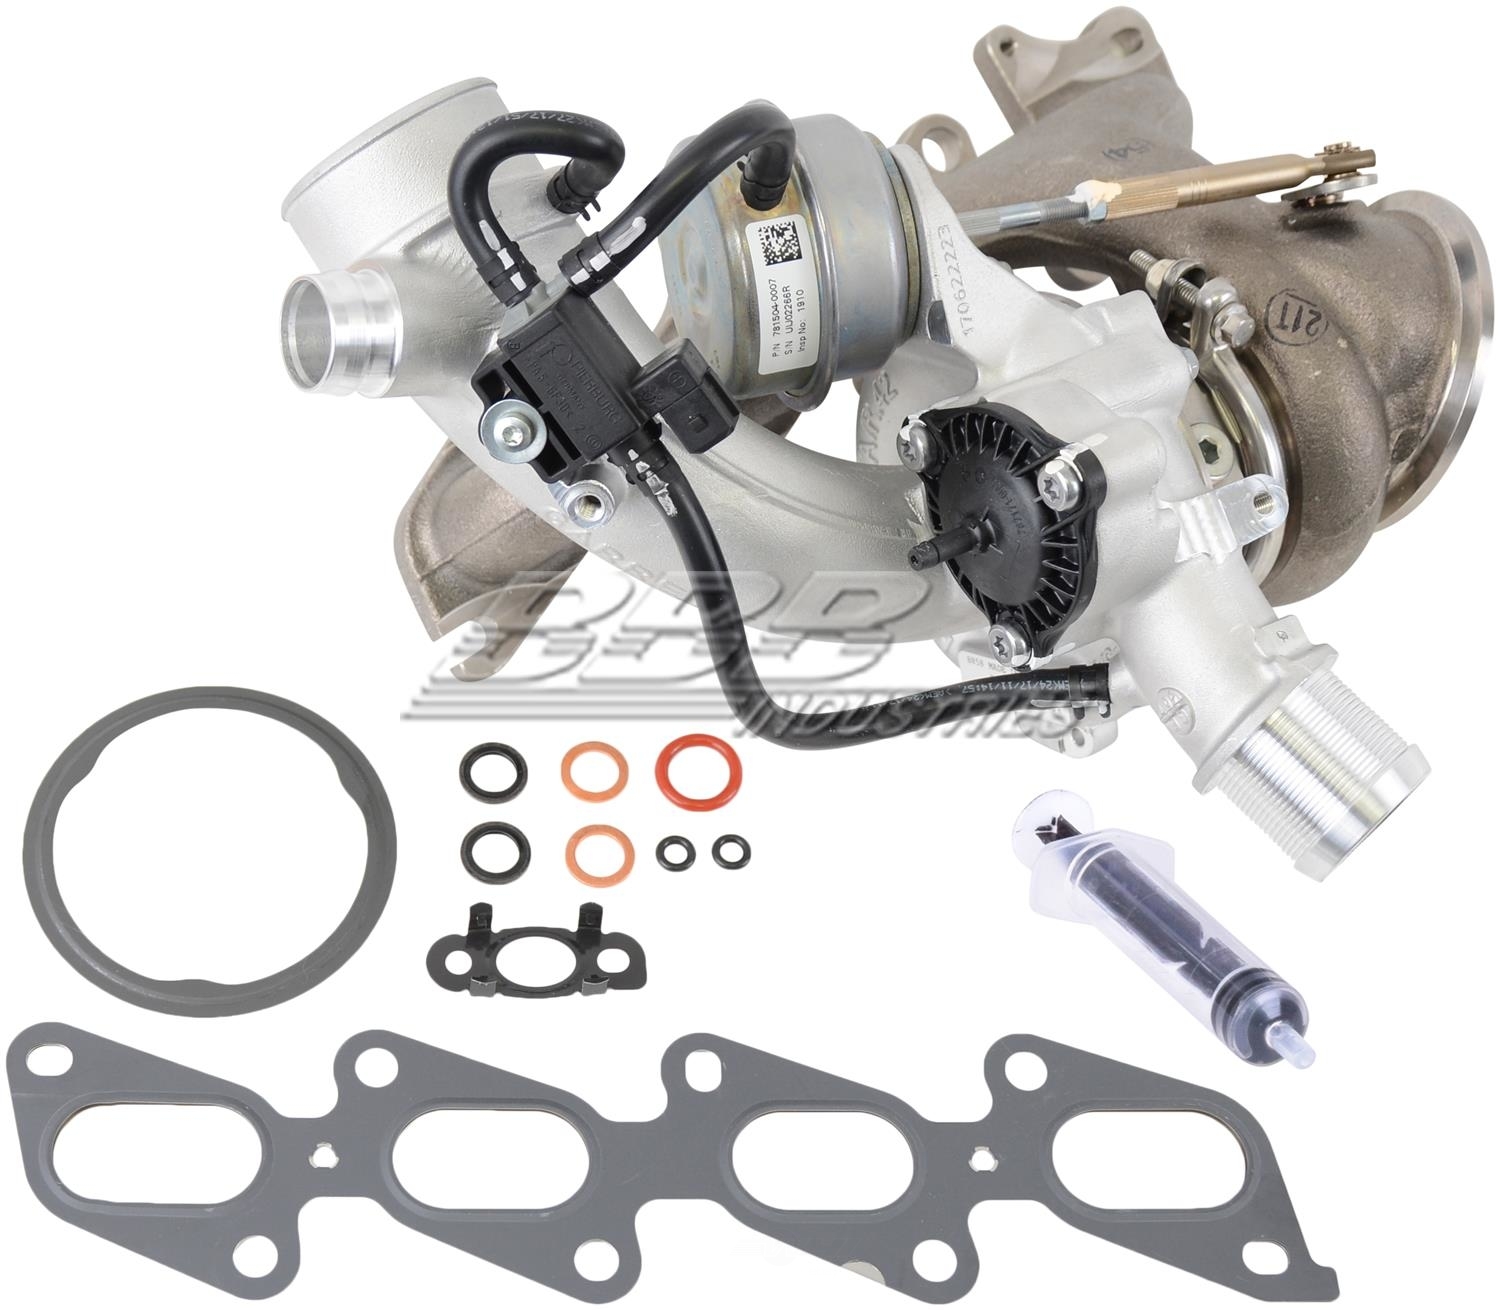 OE-TURBOPOWER - New Turbocharger w/ Gasket and Installation Kit - BBT G3011N